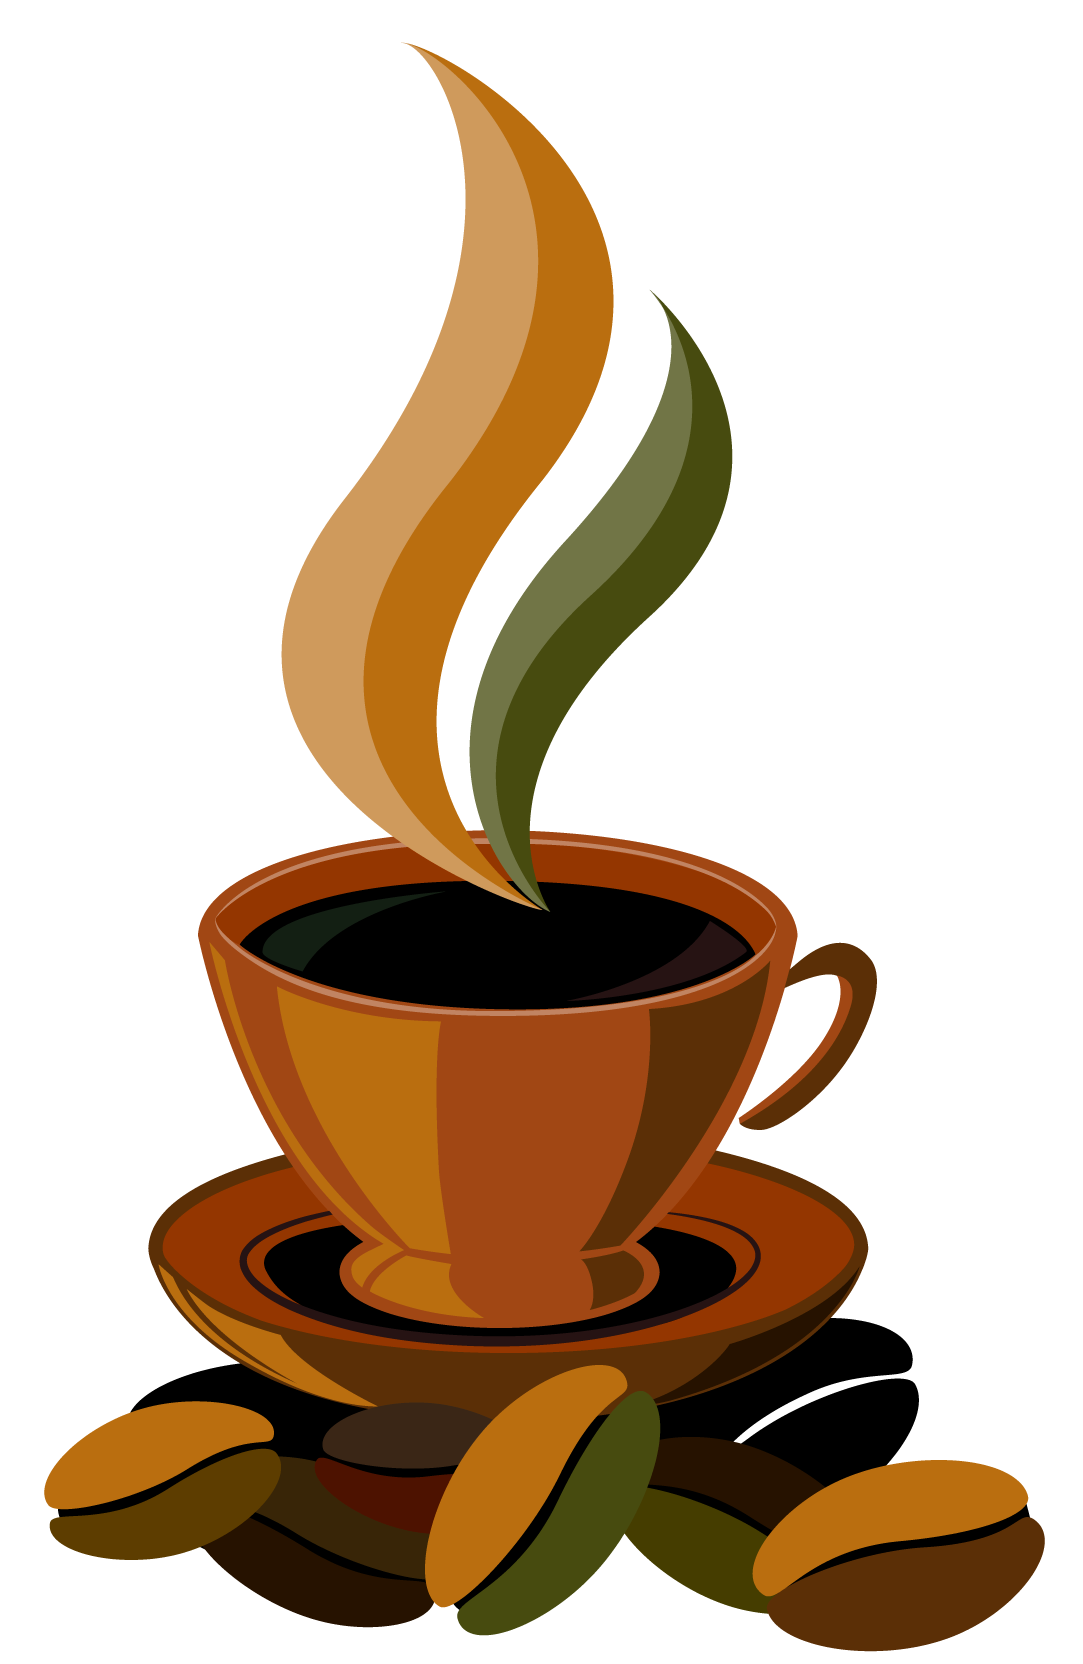 Coffee clip art free clipart image 2 2 